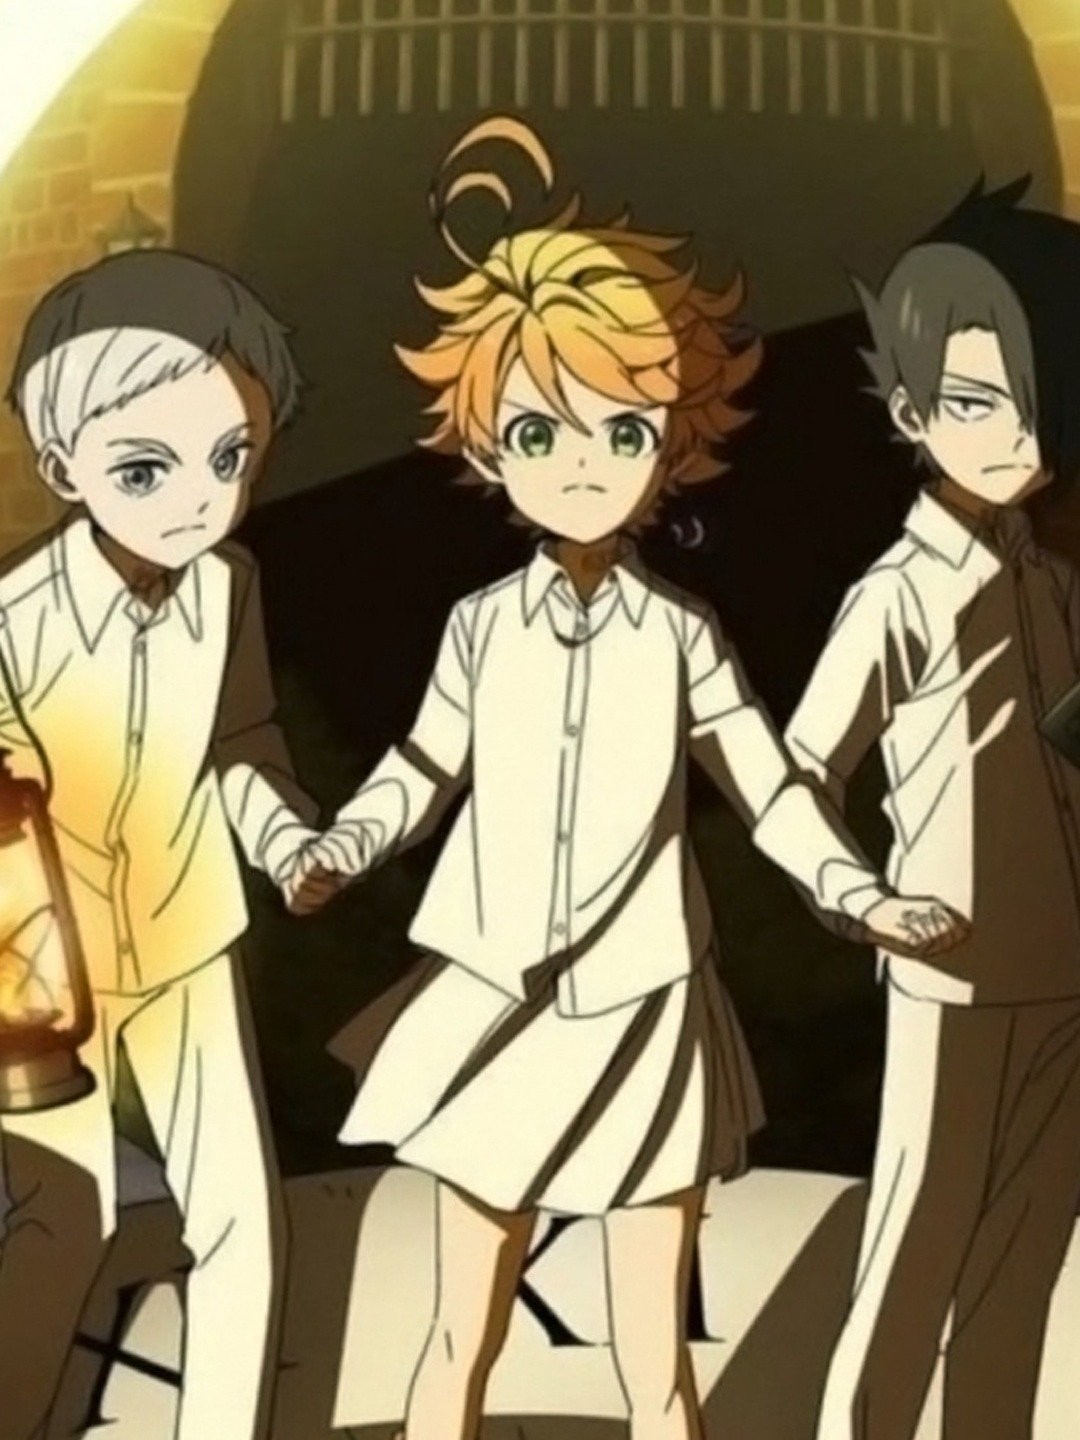 My Top 5 Favorite Scenes from The Promised Neverland - Episode 1